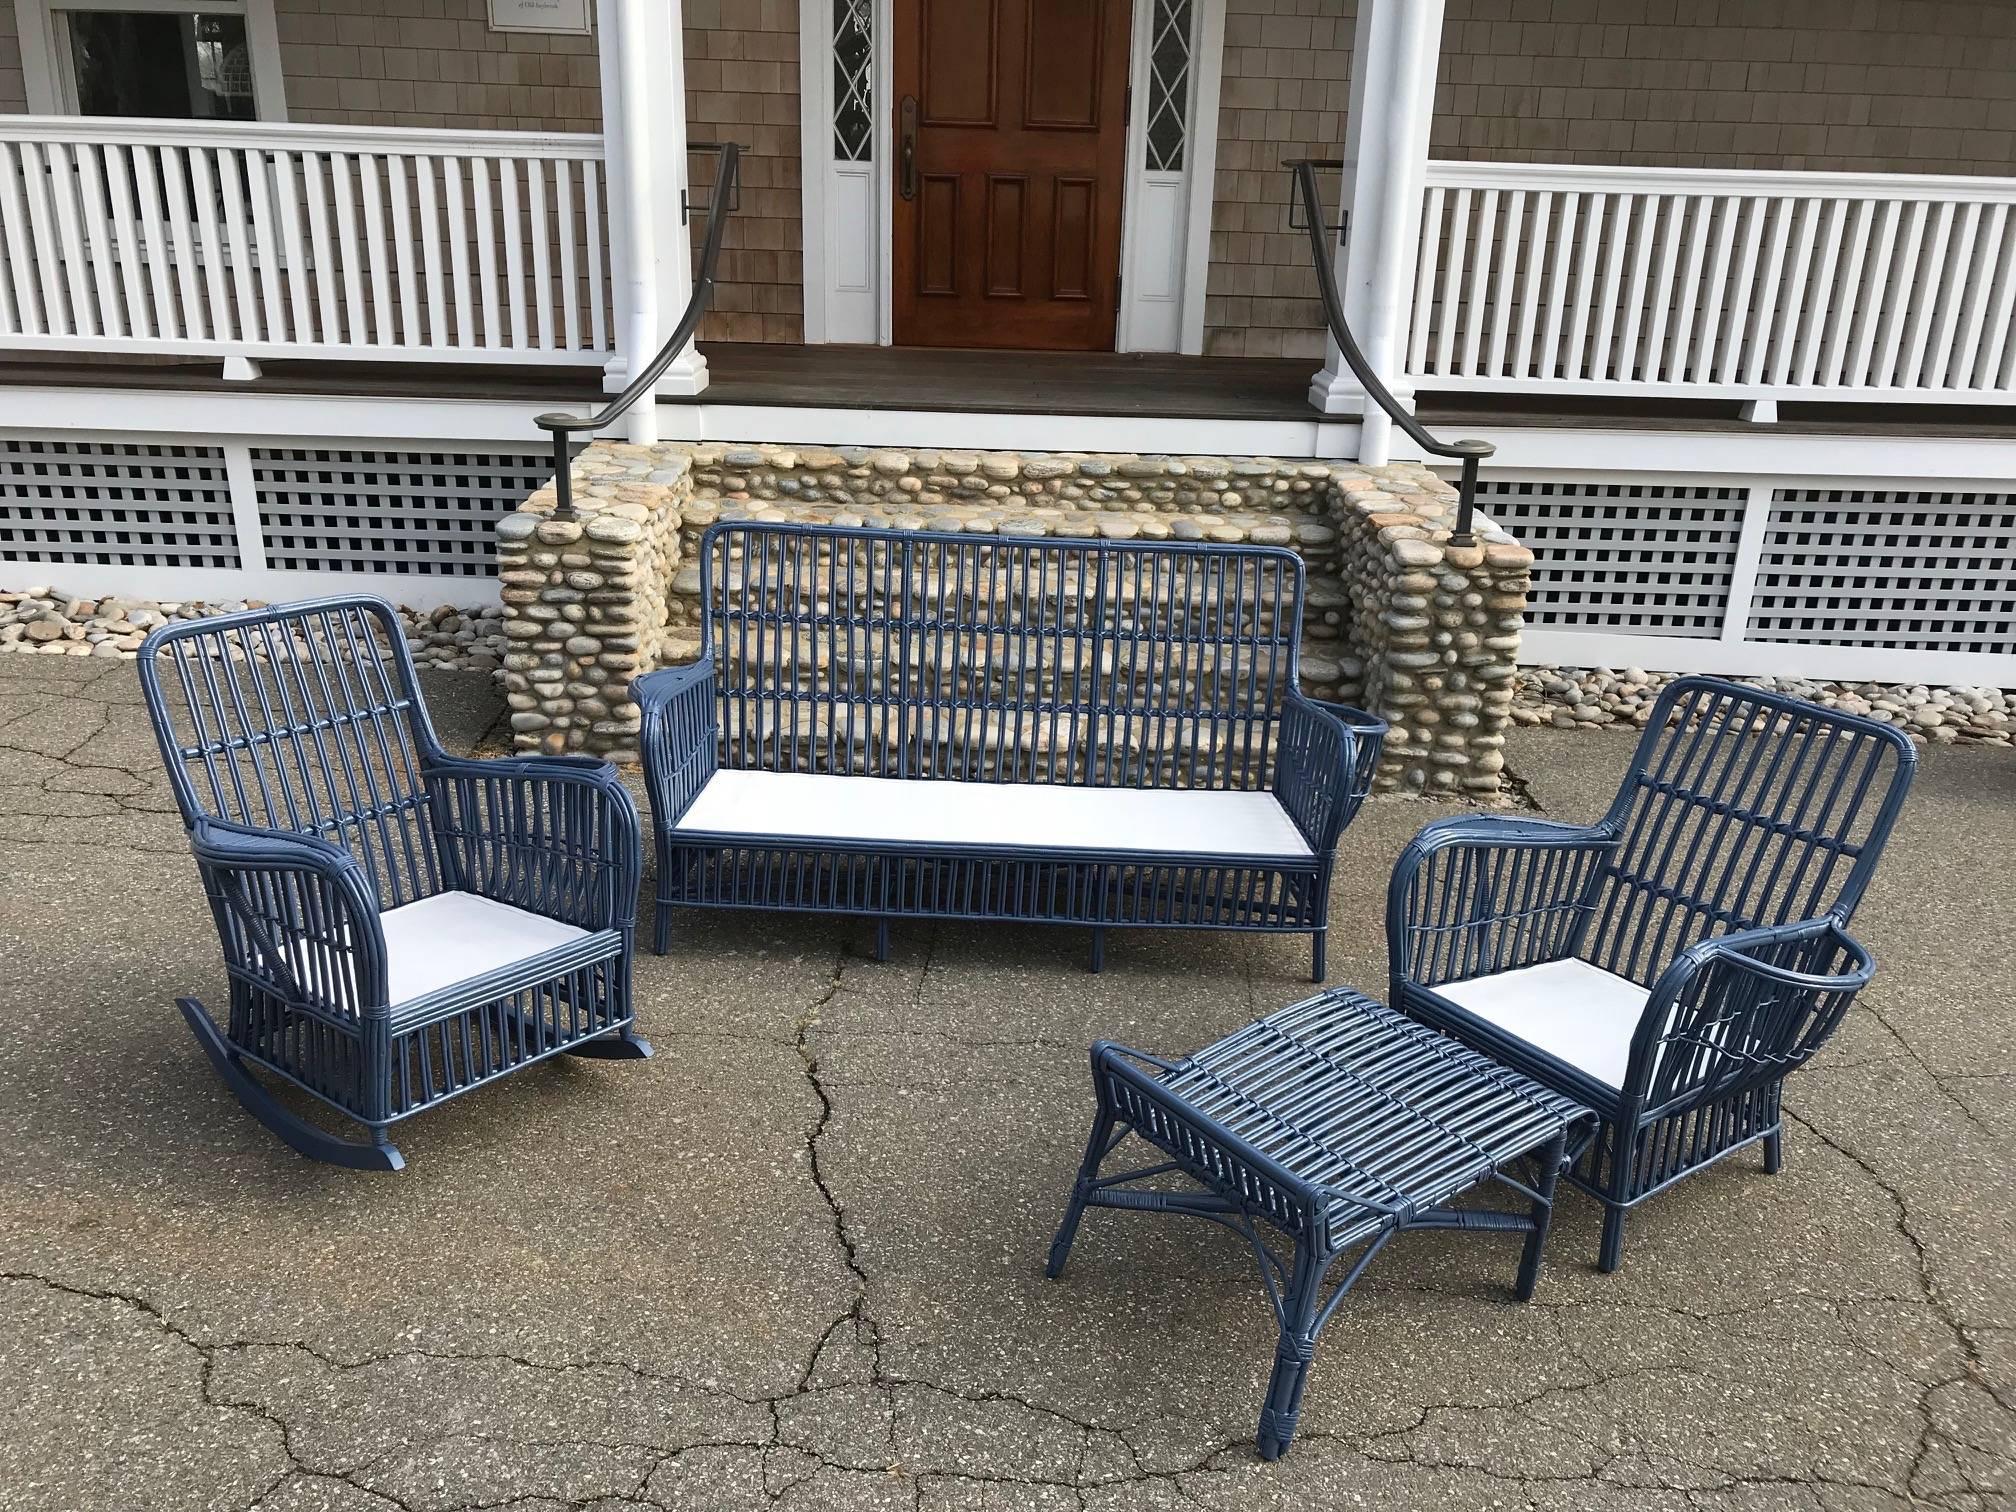 Antique stick wicker set made of rattan and freshly painted a marine blue. This set includes a rocker as well as a chair which is unusual for antique stick sets. Moderate in scale and comfortably built.
Measures: Sofa 72 wide, 35.5 tall, 30 deep,